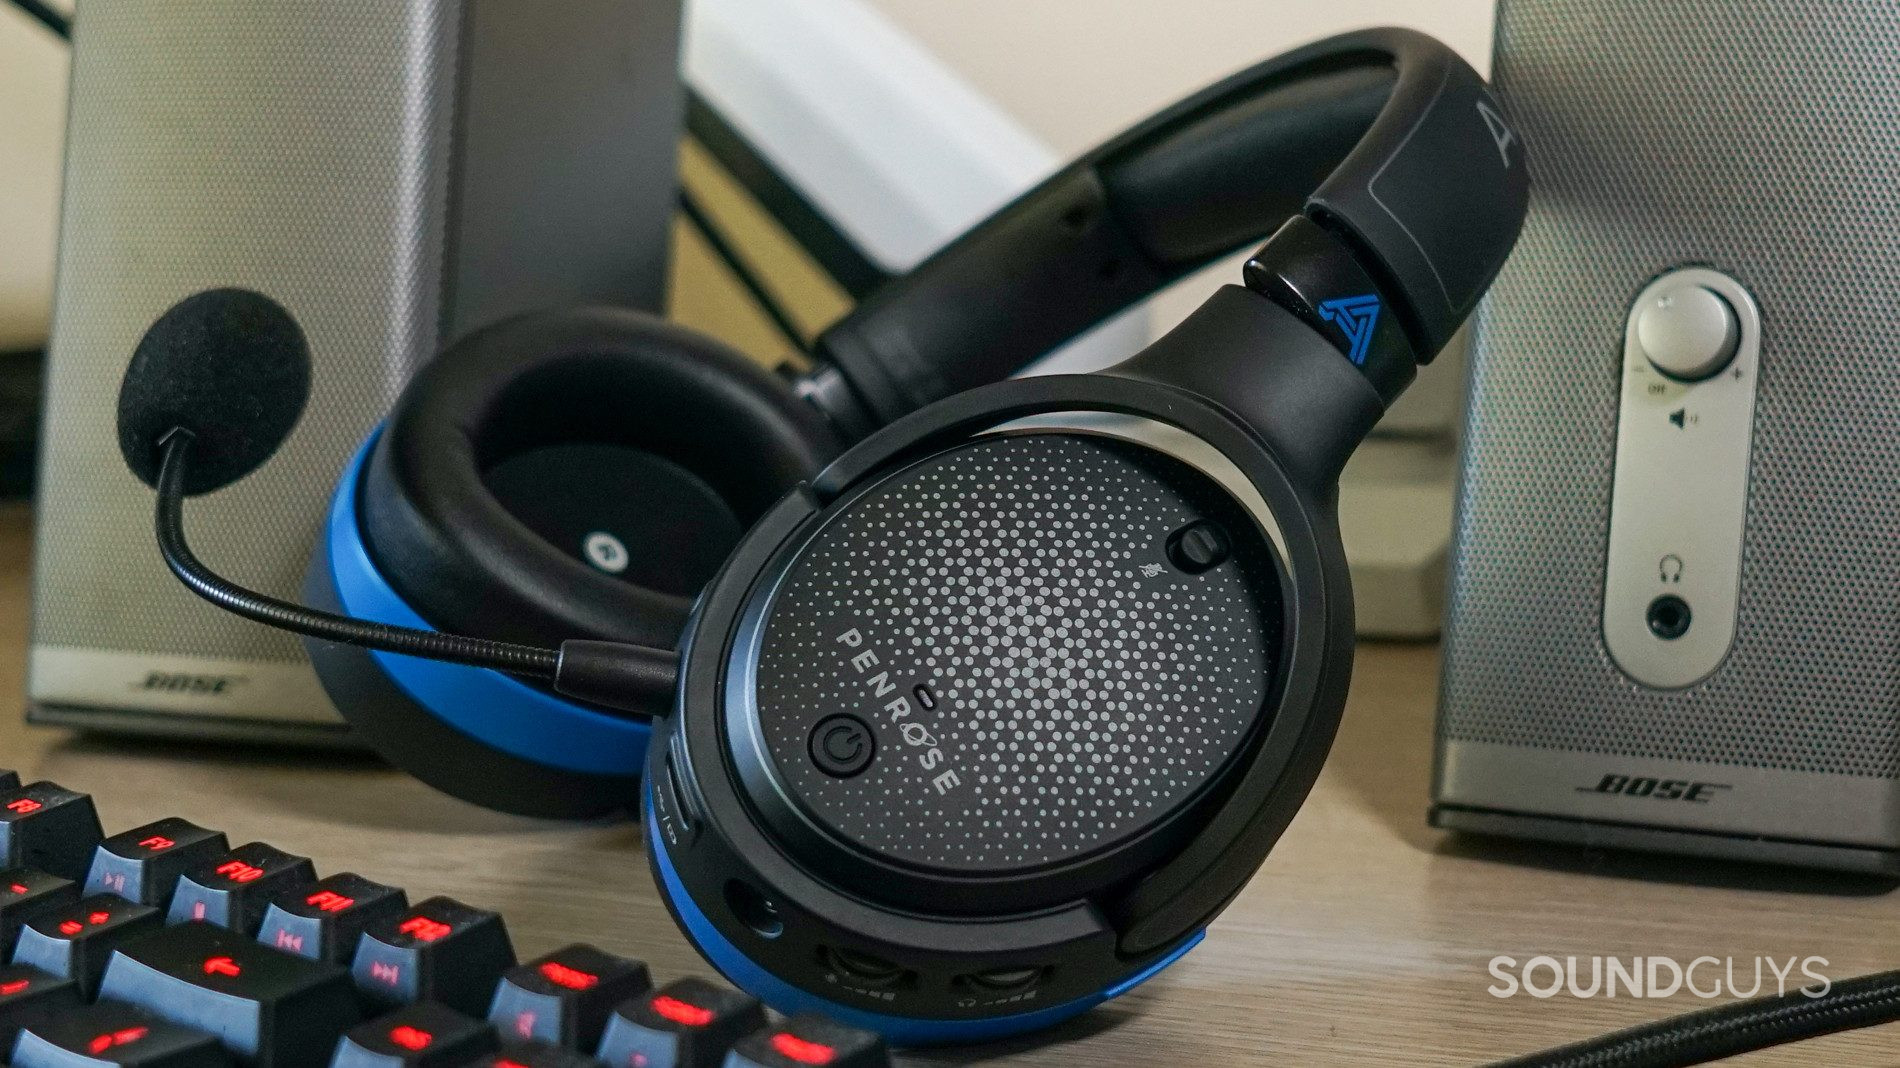 The Audeze Penrose sits on a PC in between Bose companion speakers, and in front of a Logitech G413 Carbon mechanical gaming keyboard